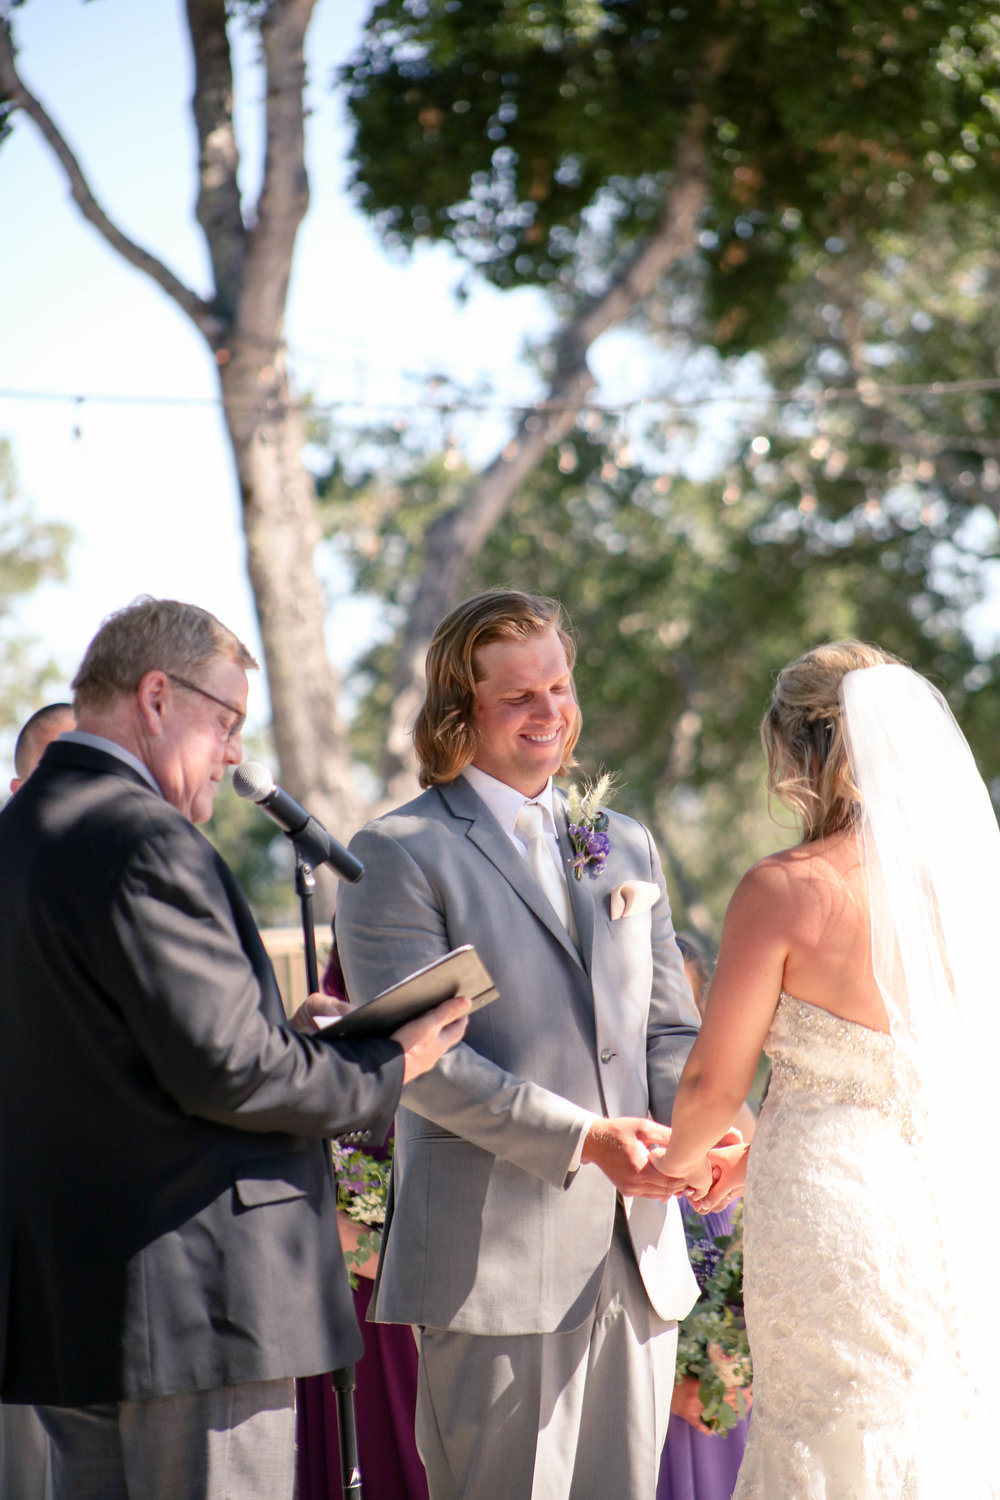 groom smiling at his bride during an outdoor wedding ceremony